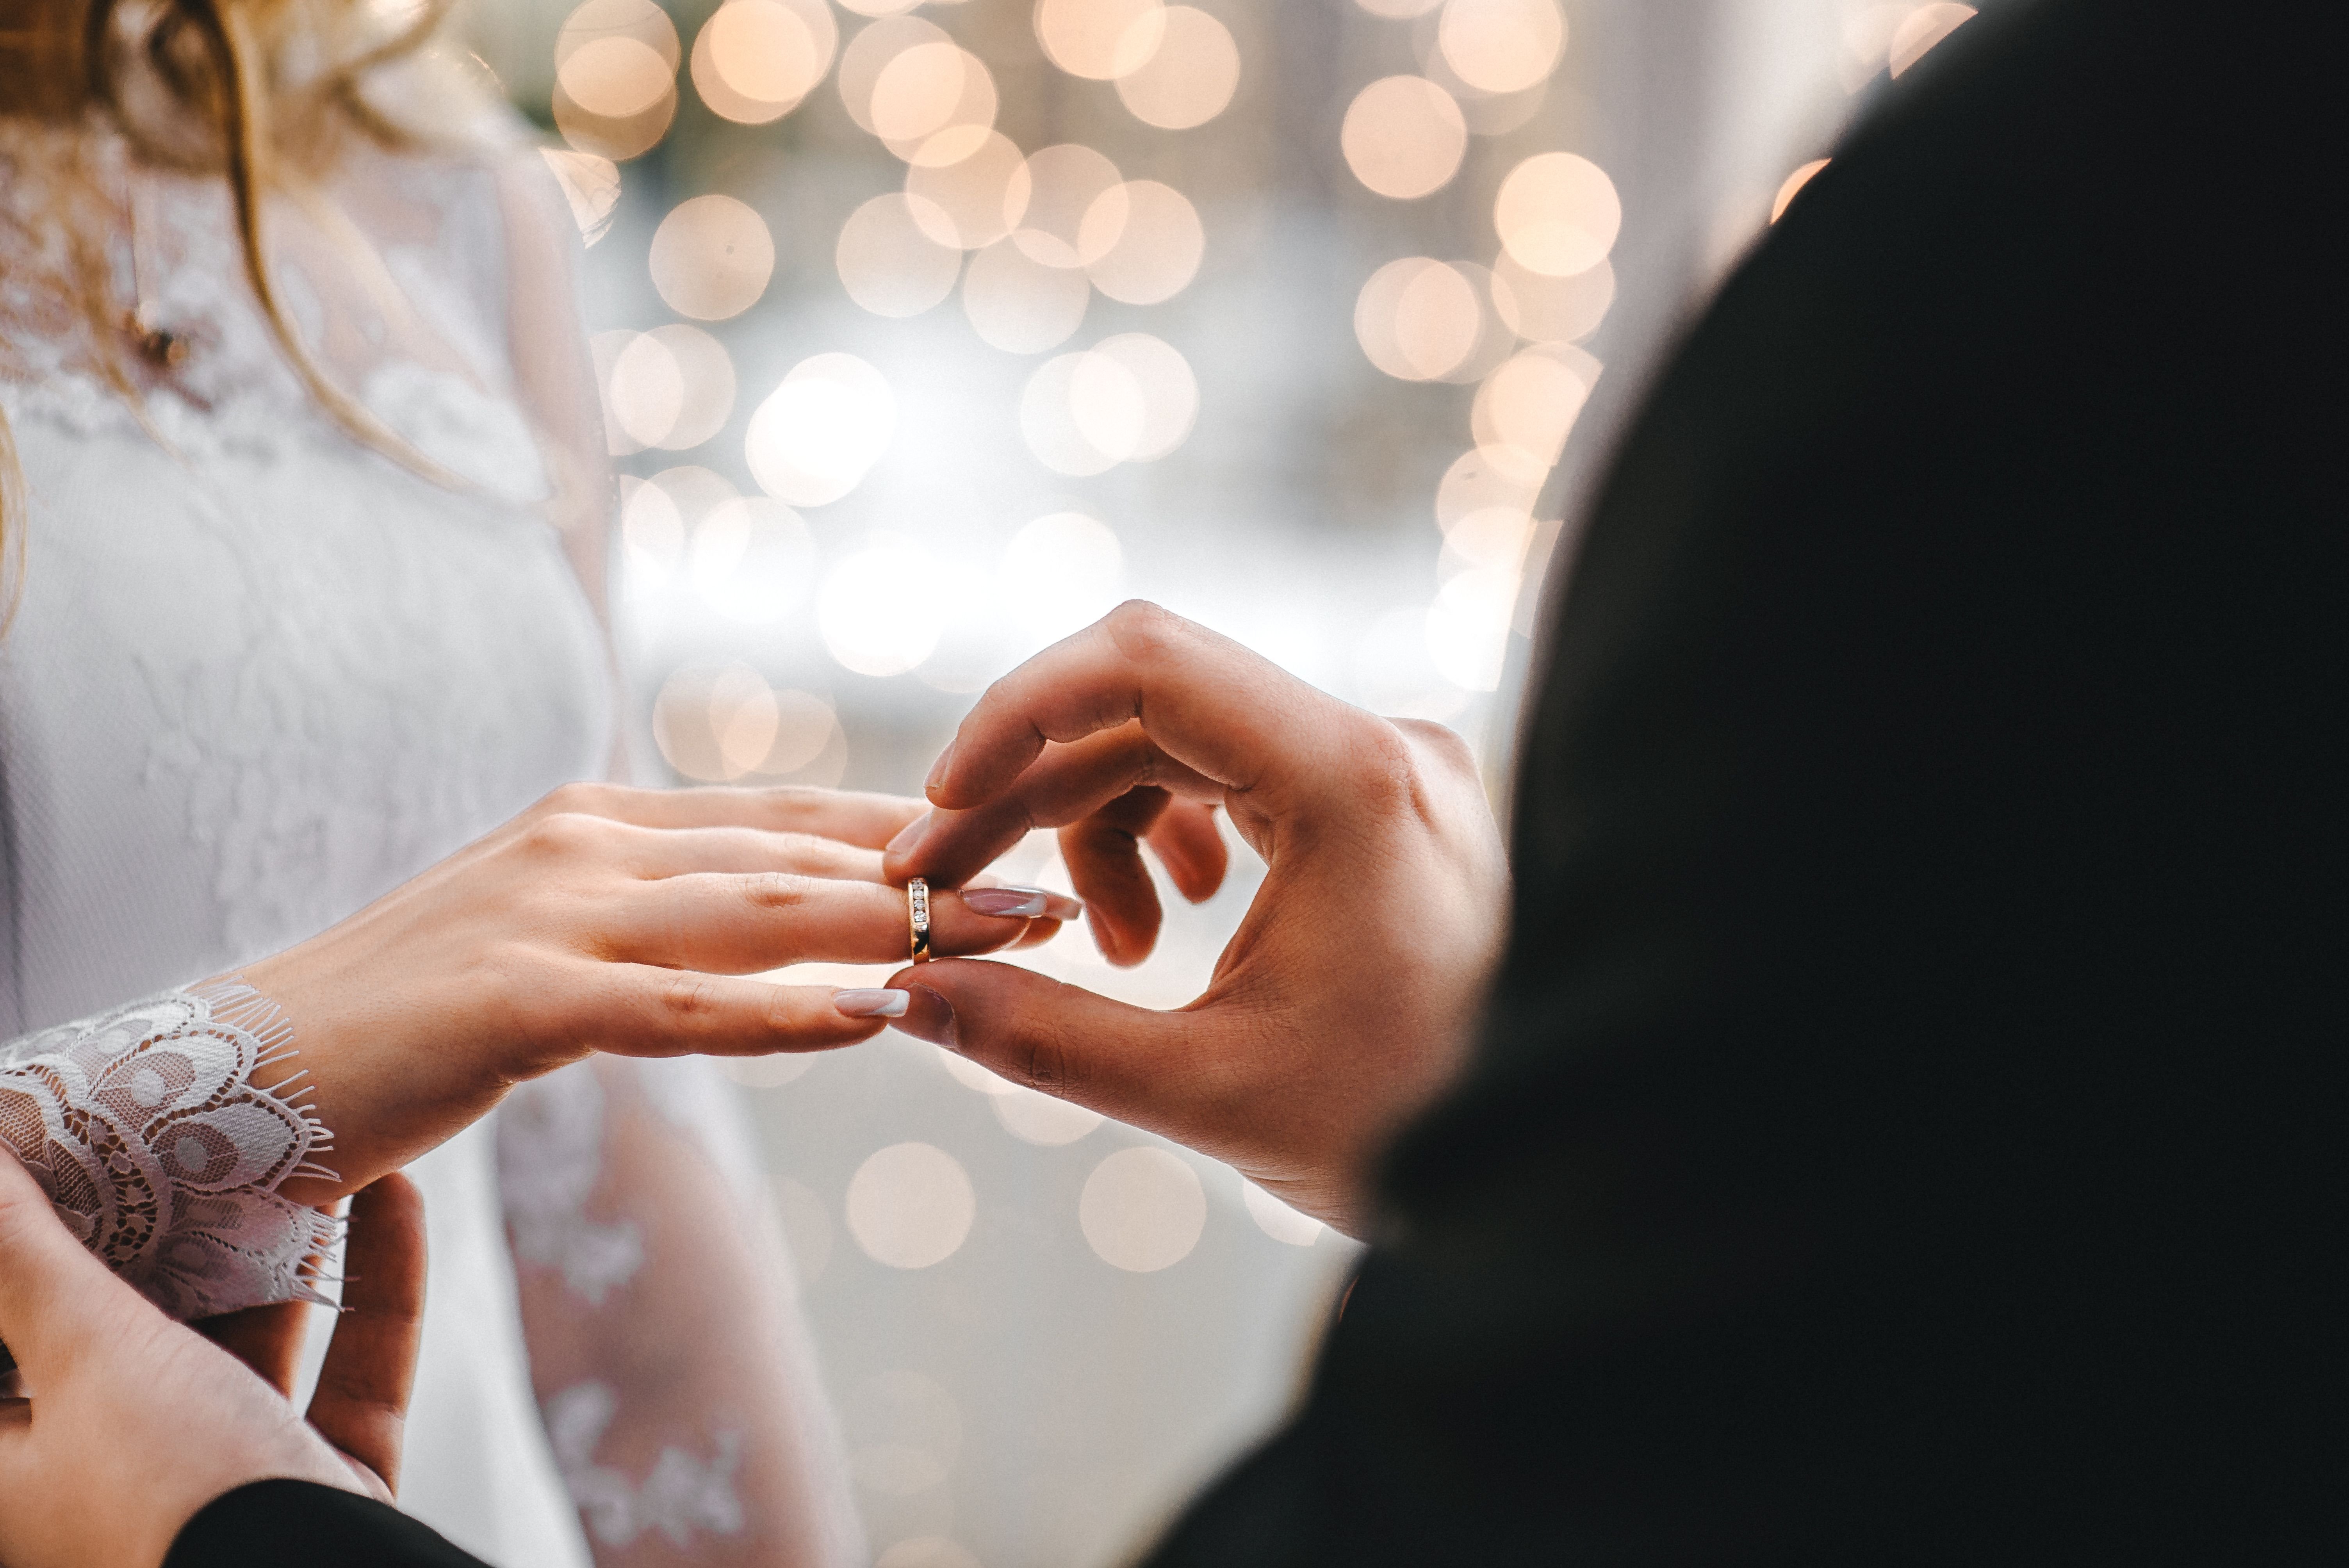 A few months after their dinner date, Judy and Michael got married and have remained so to this day | Source: Pexels